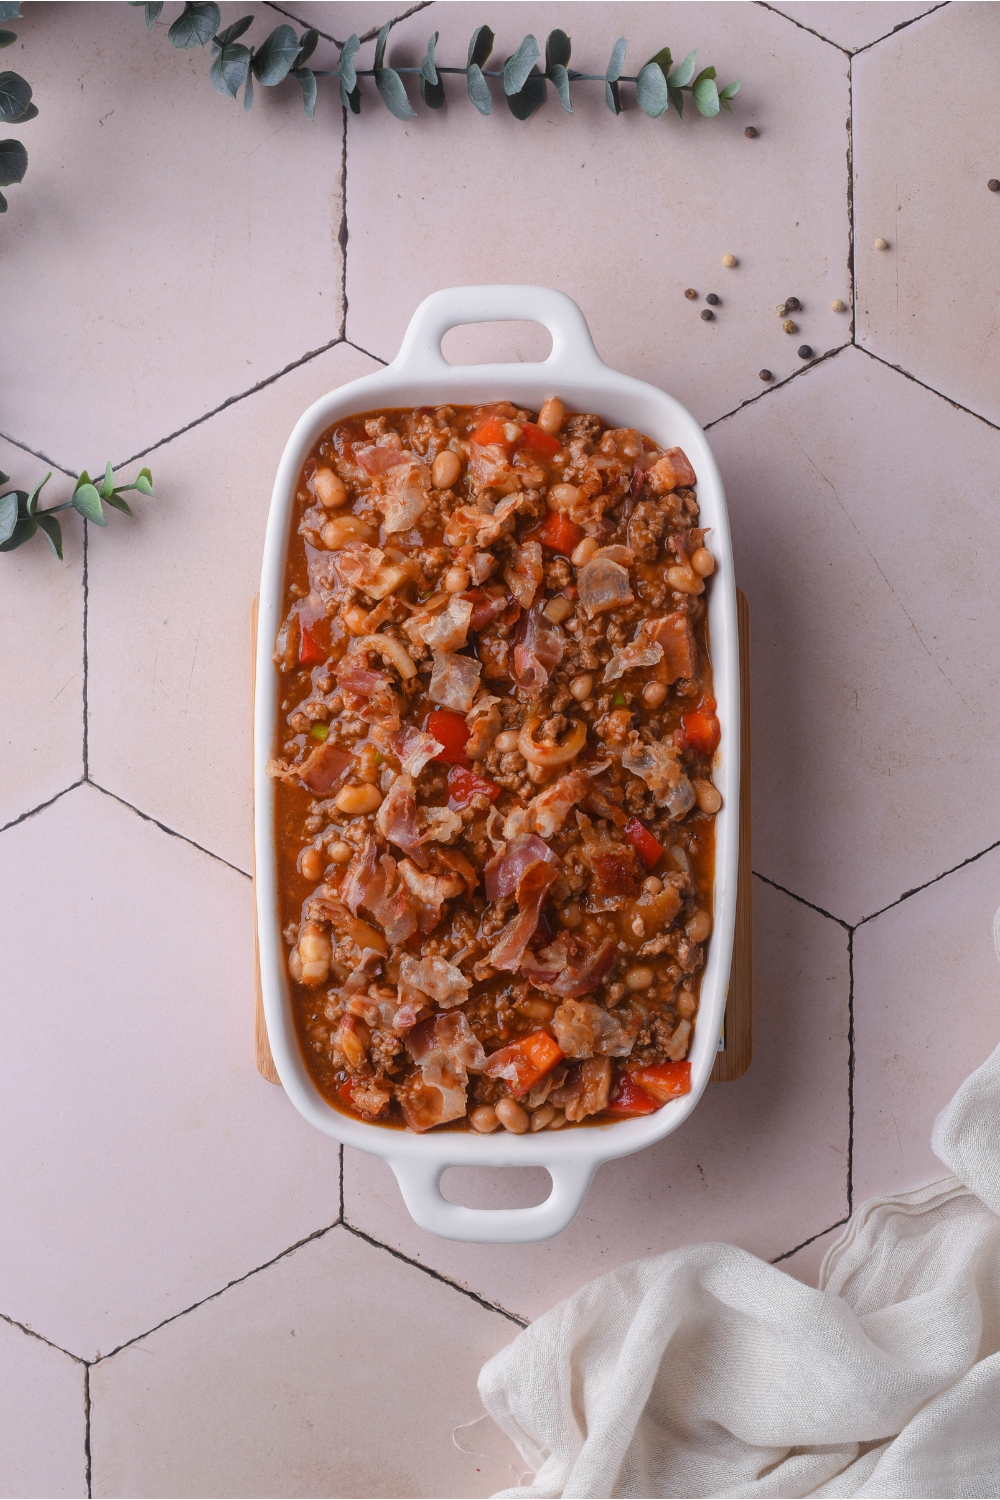 Overview of a white baking dish filled with baked beans with ground beef, bacon, diced peppers and diced onions.